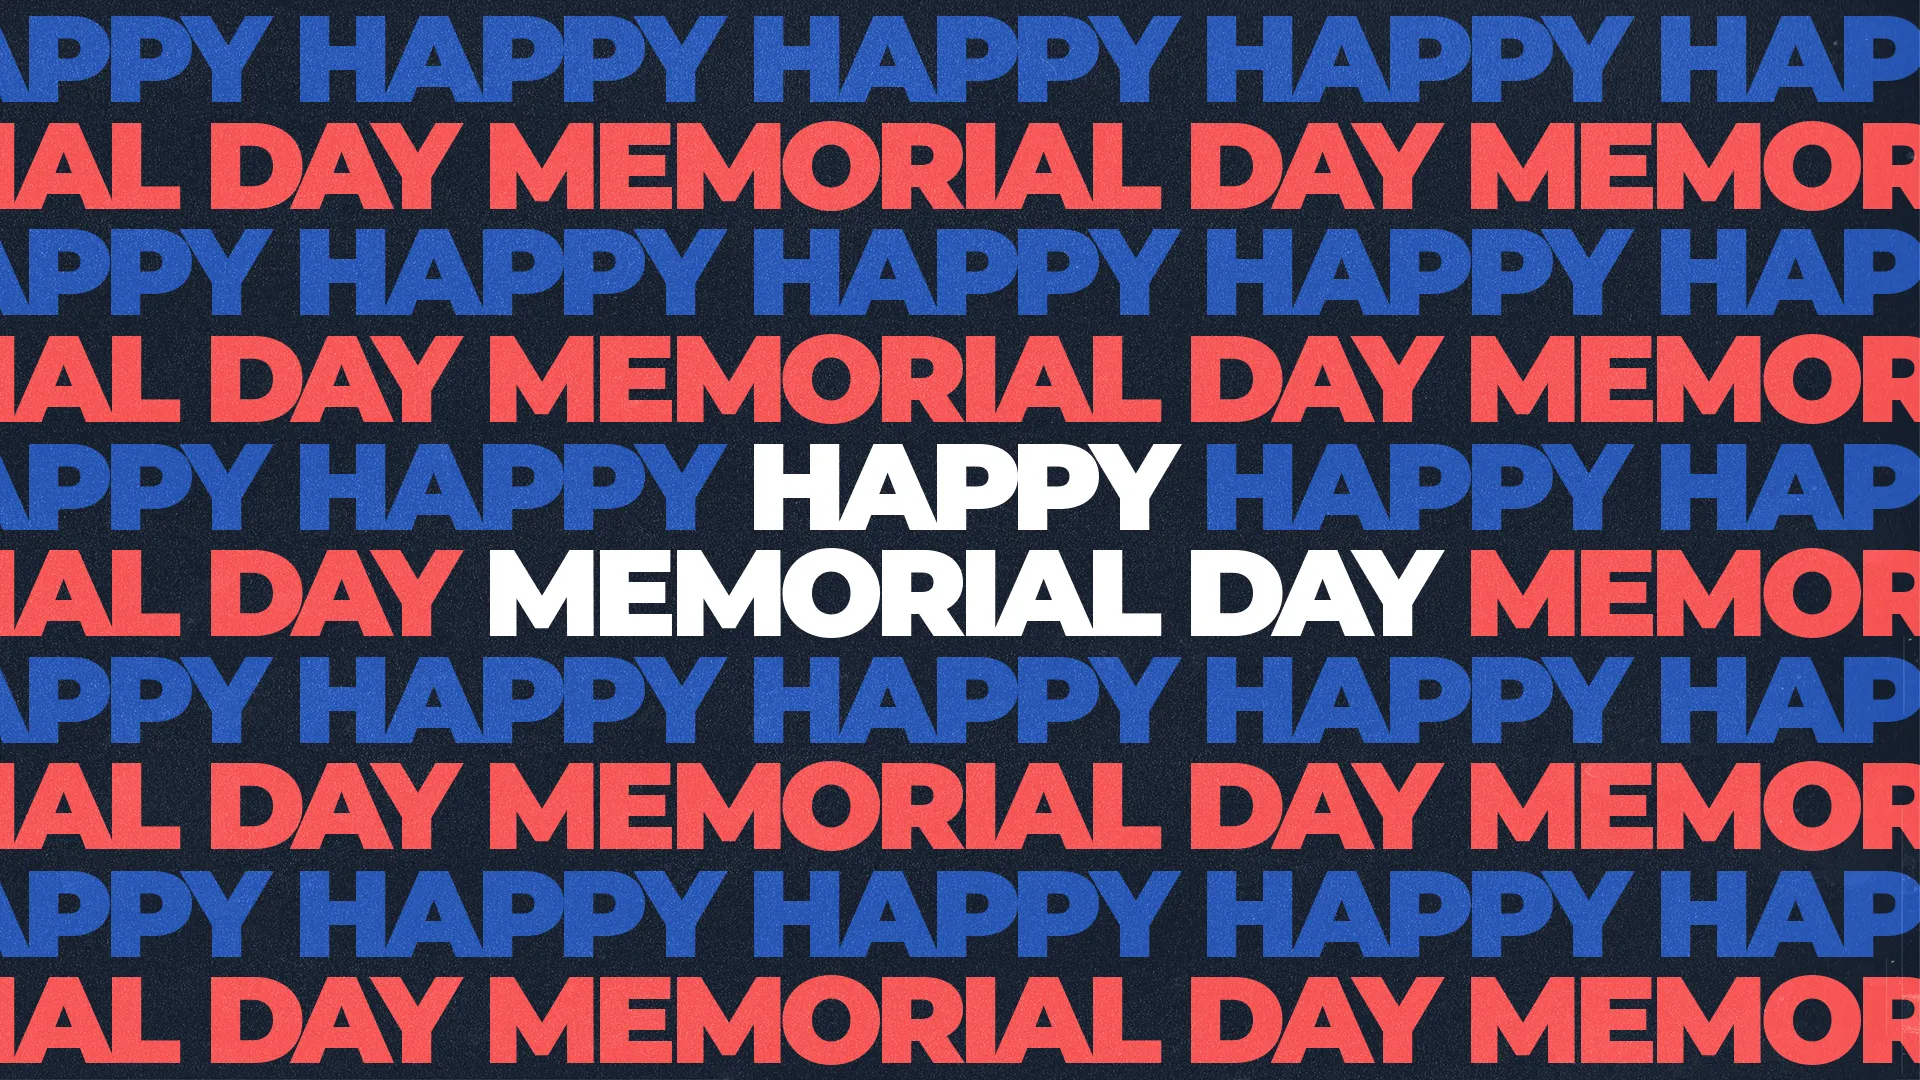 Commemorate And Celebrate With This Bold Memorial Day Graphic, Designed To Honor Those Who Have Served And To Bring Together Your Church Community In Remembrance And Gratitude On This Important Day.